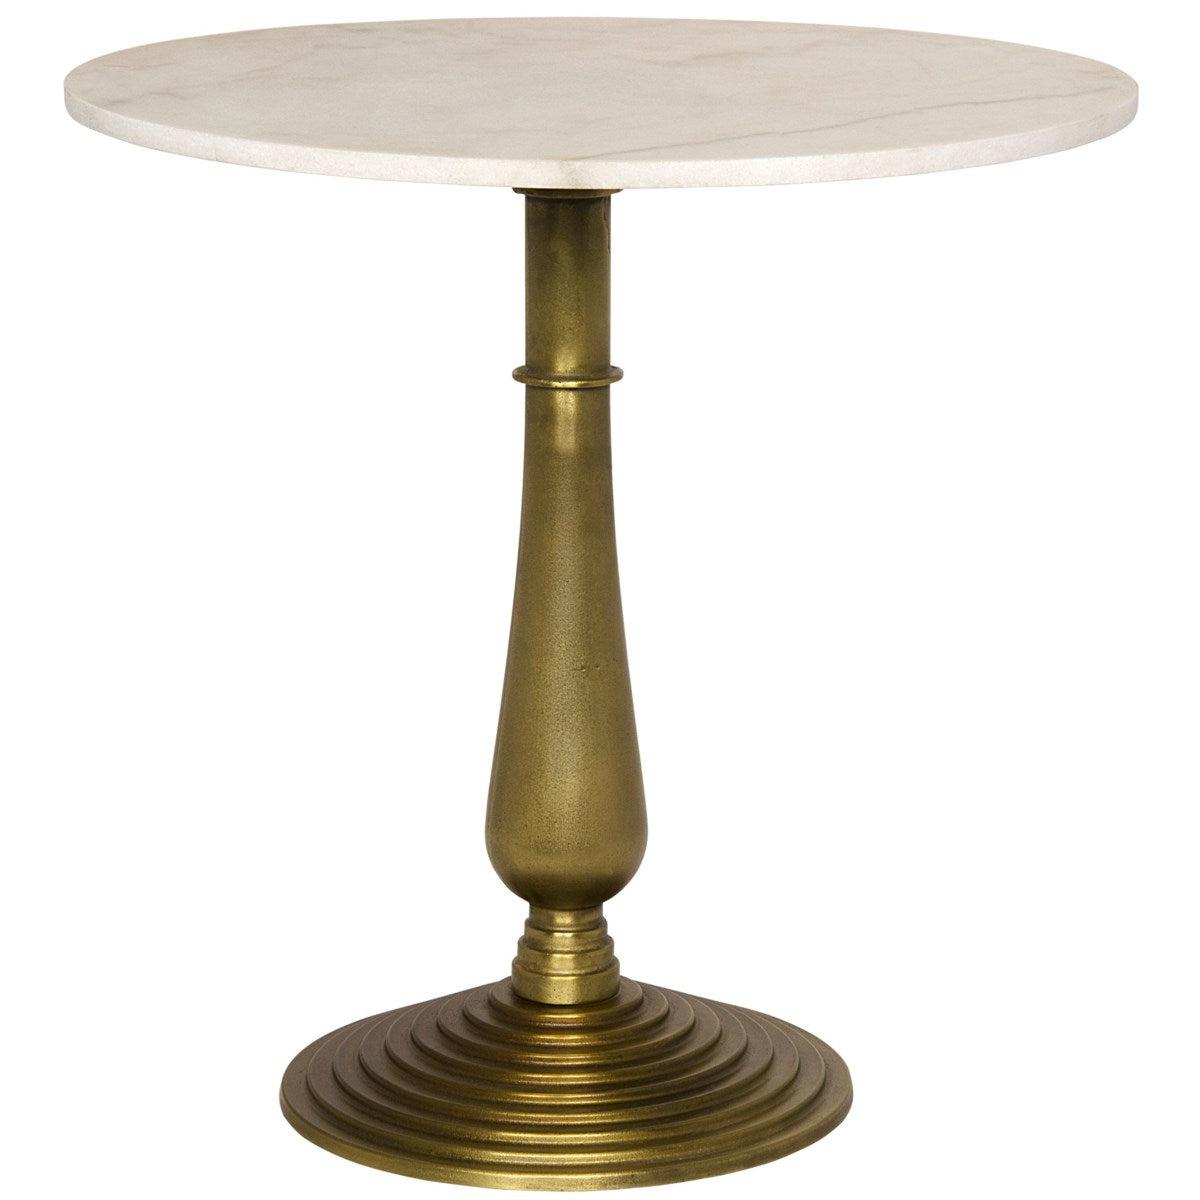 Noir Furniture Alida Side Table with White Stone, Brass Finish-Noir Furniture-Blue Hand Home